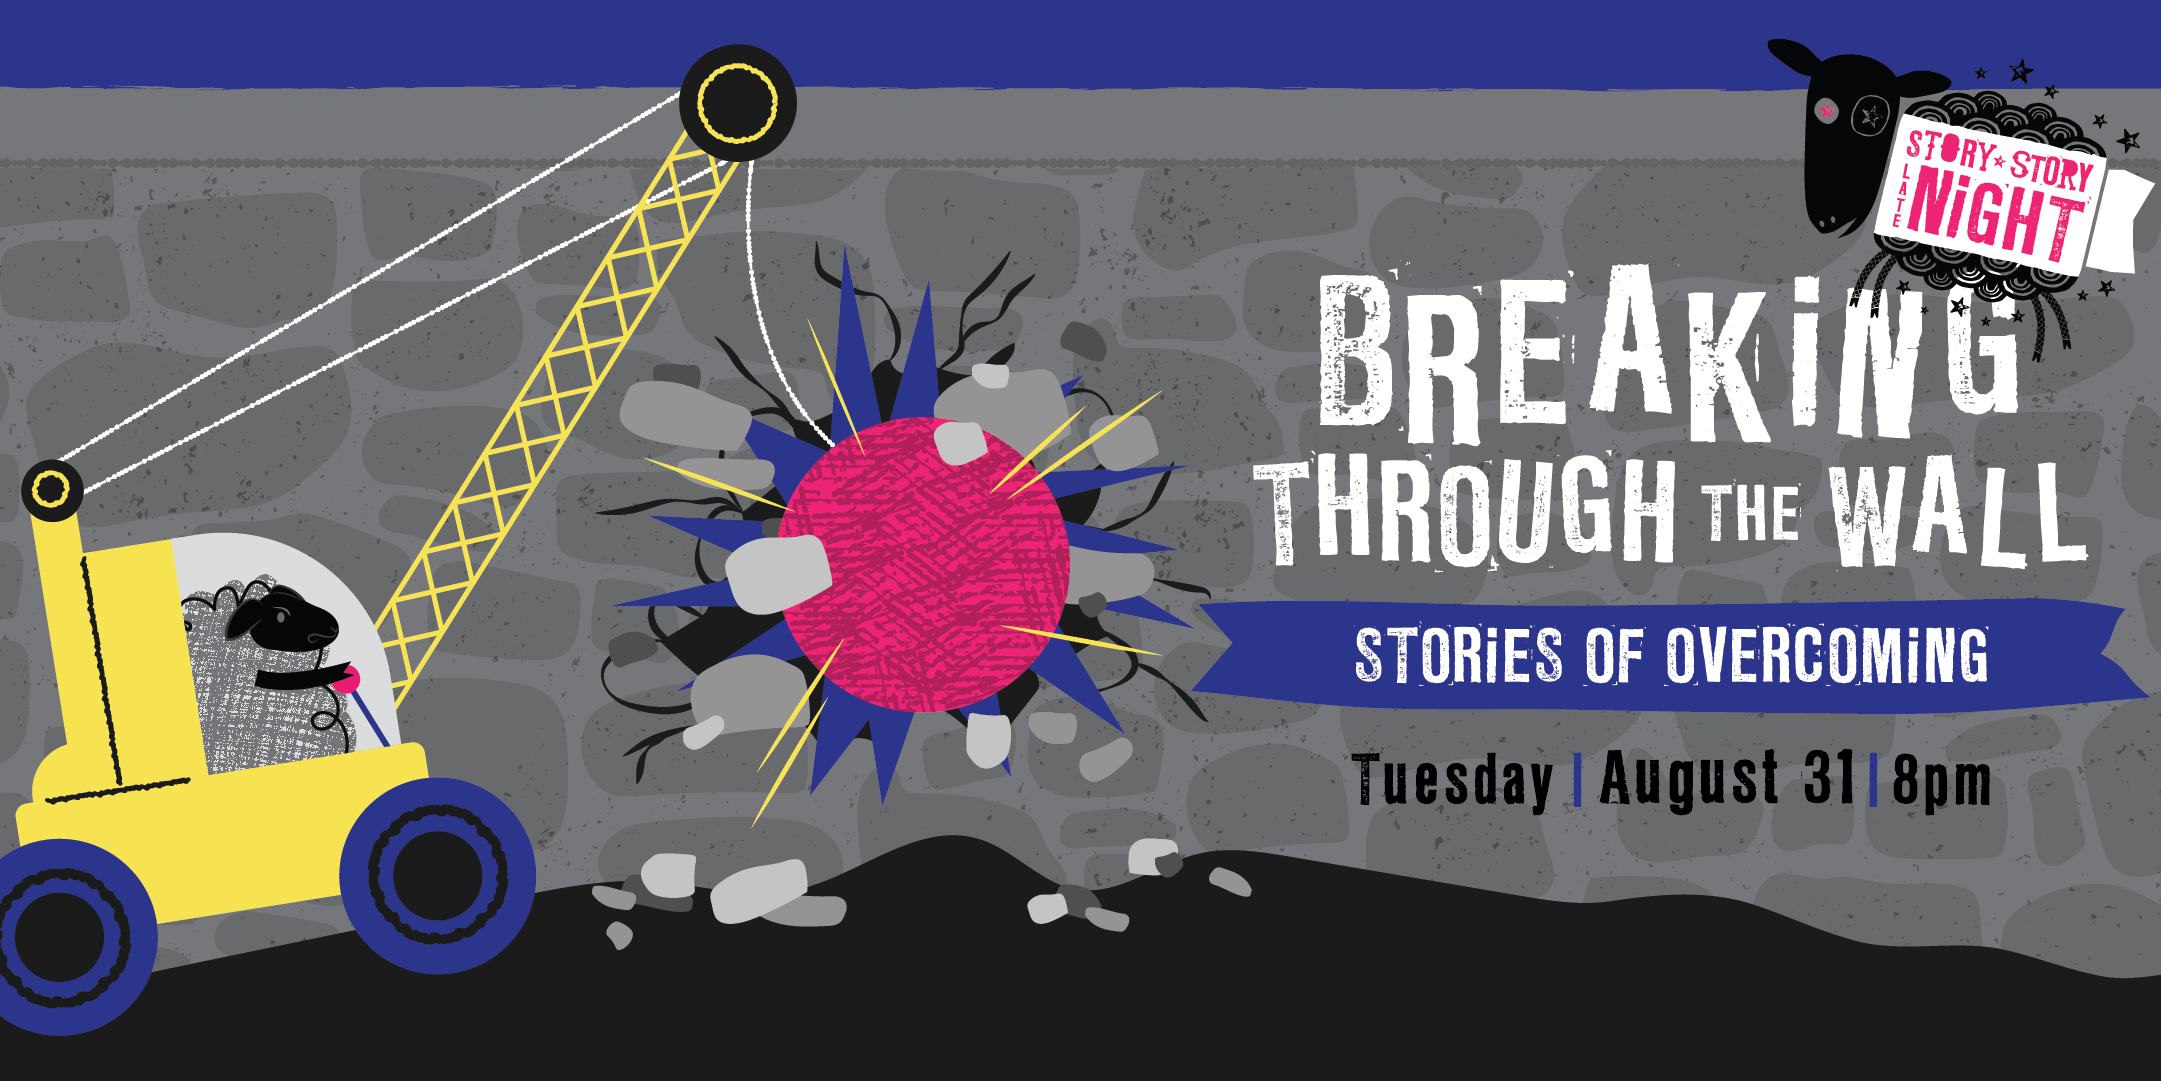 Theme of show is Breaking Through the Wall: Stories of Overcoming